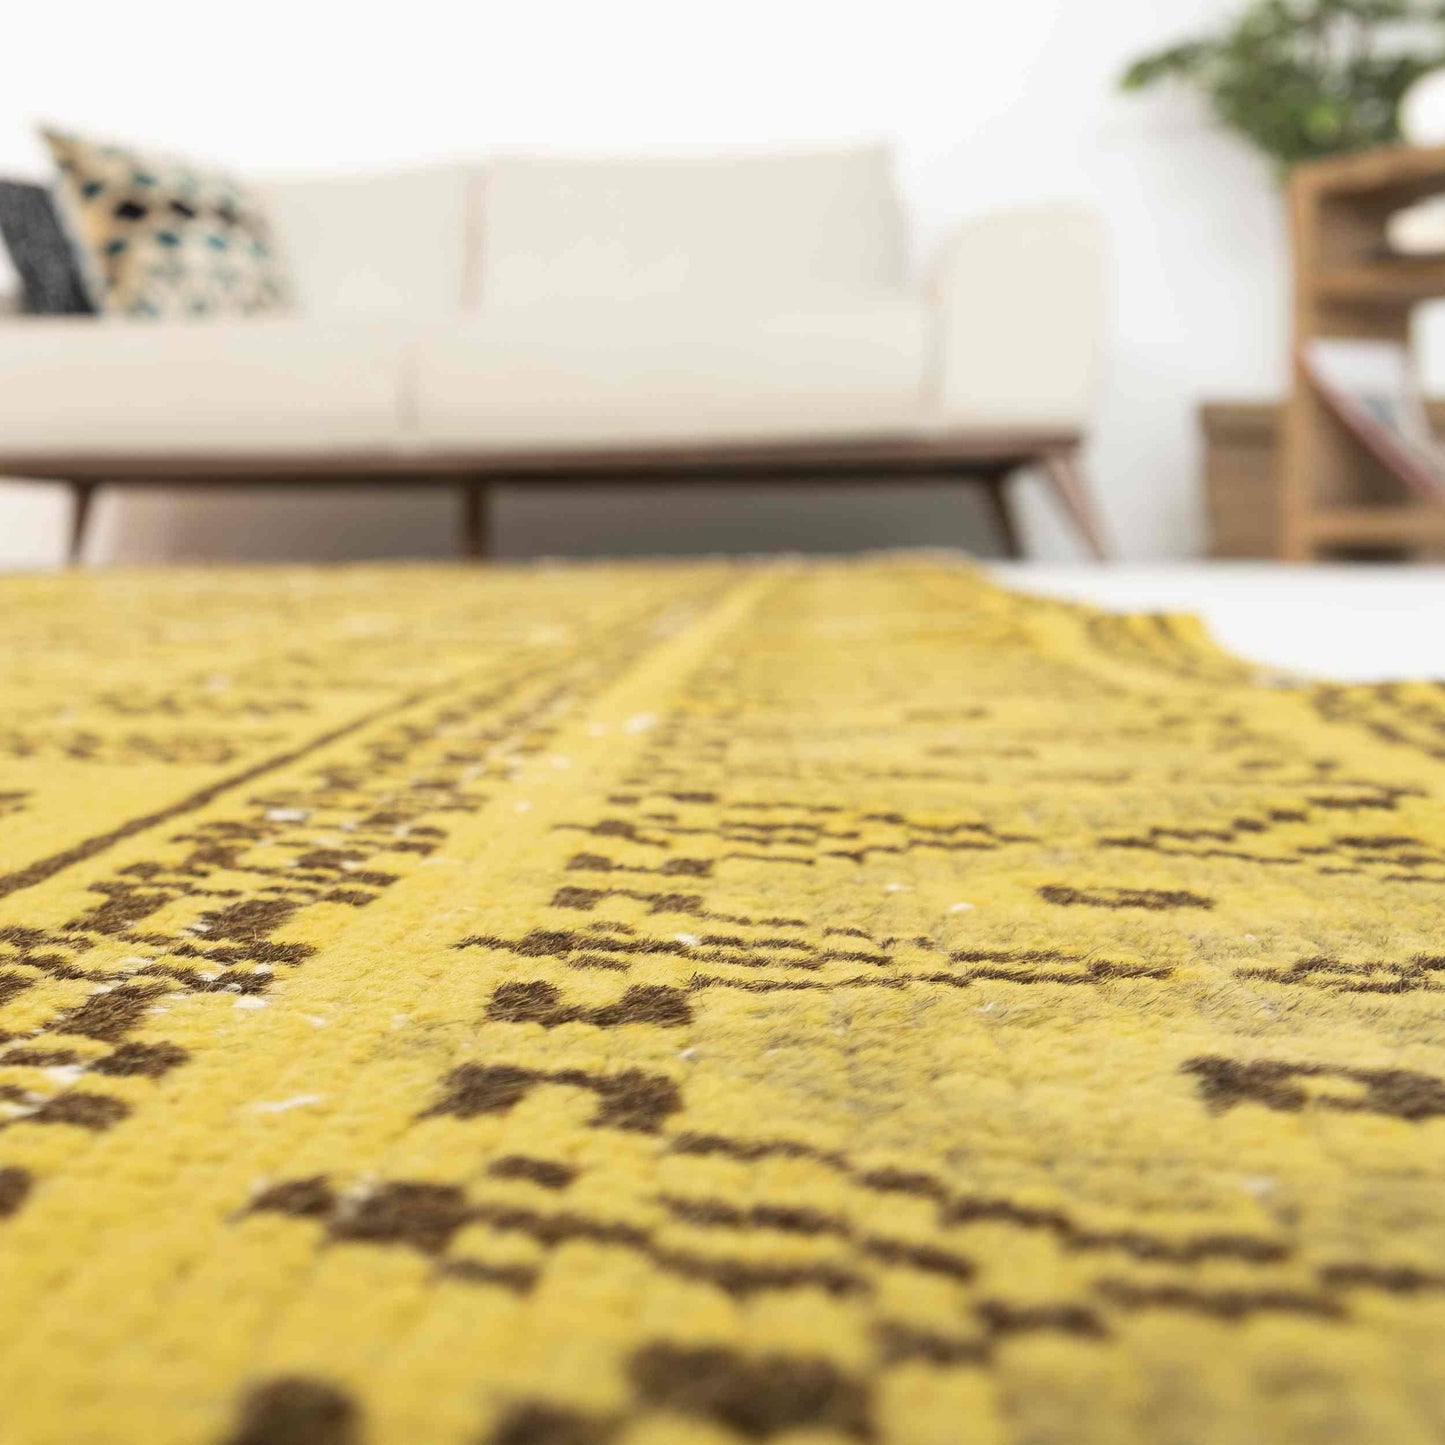 Oriental Rug Vintage Hand Knotted Wool On Cotton 161 x 276 Cm - 5' 4'' x 9' 1'' YEllow C006 ER12